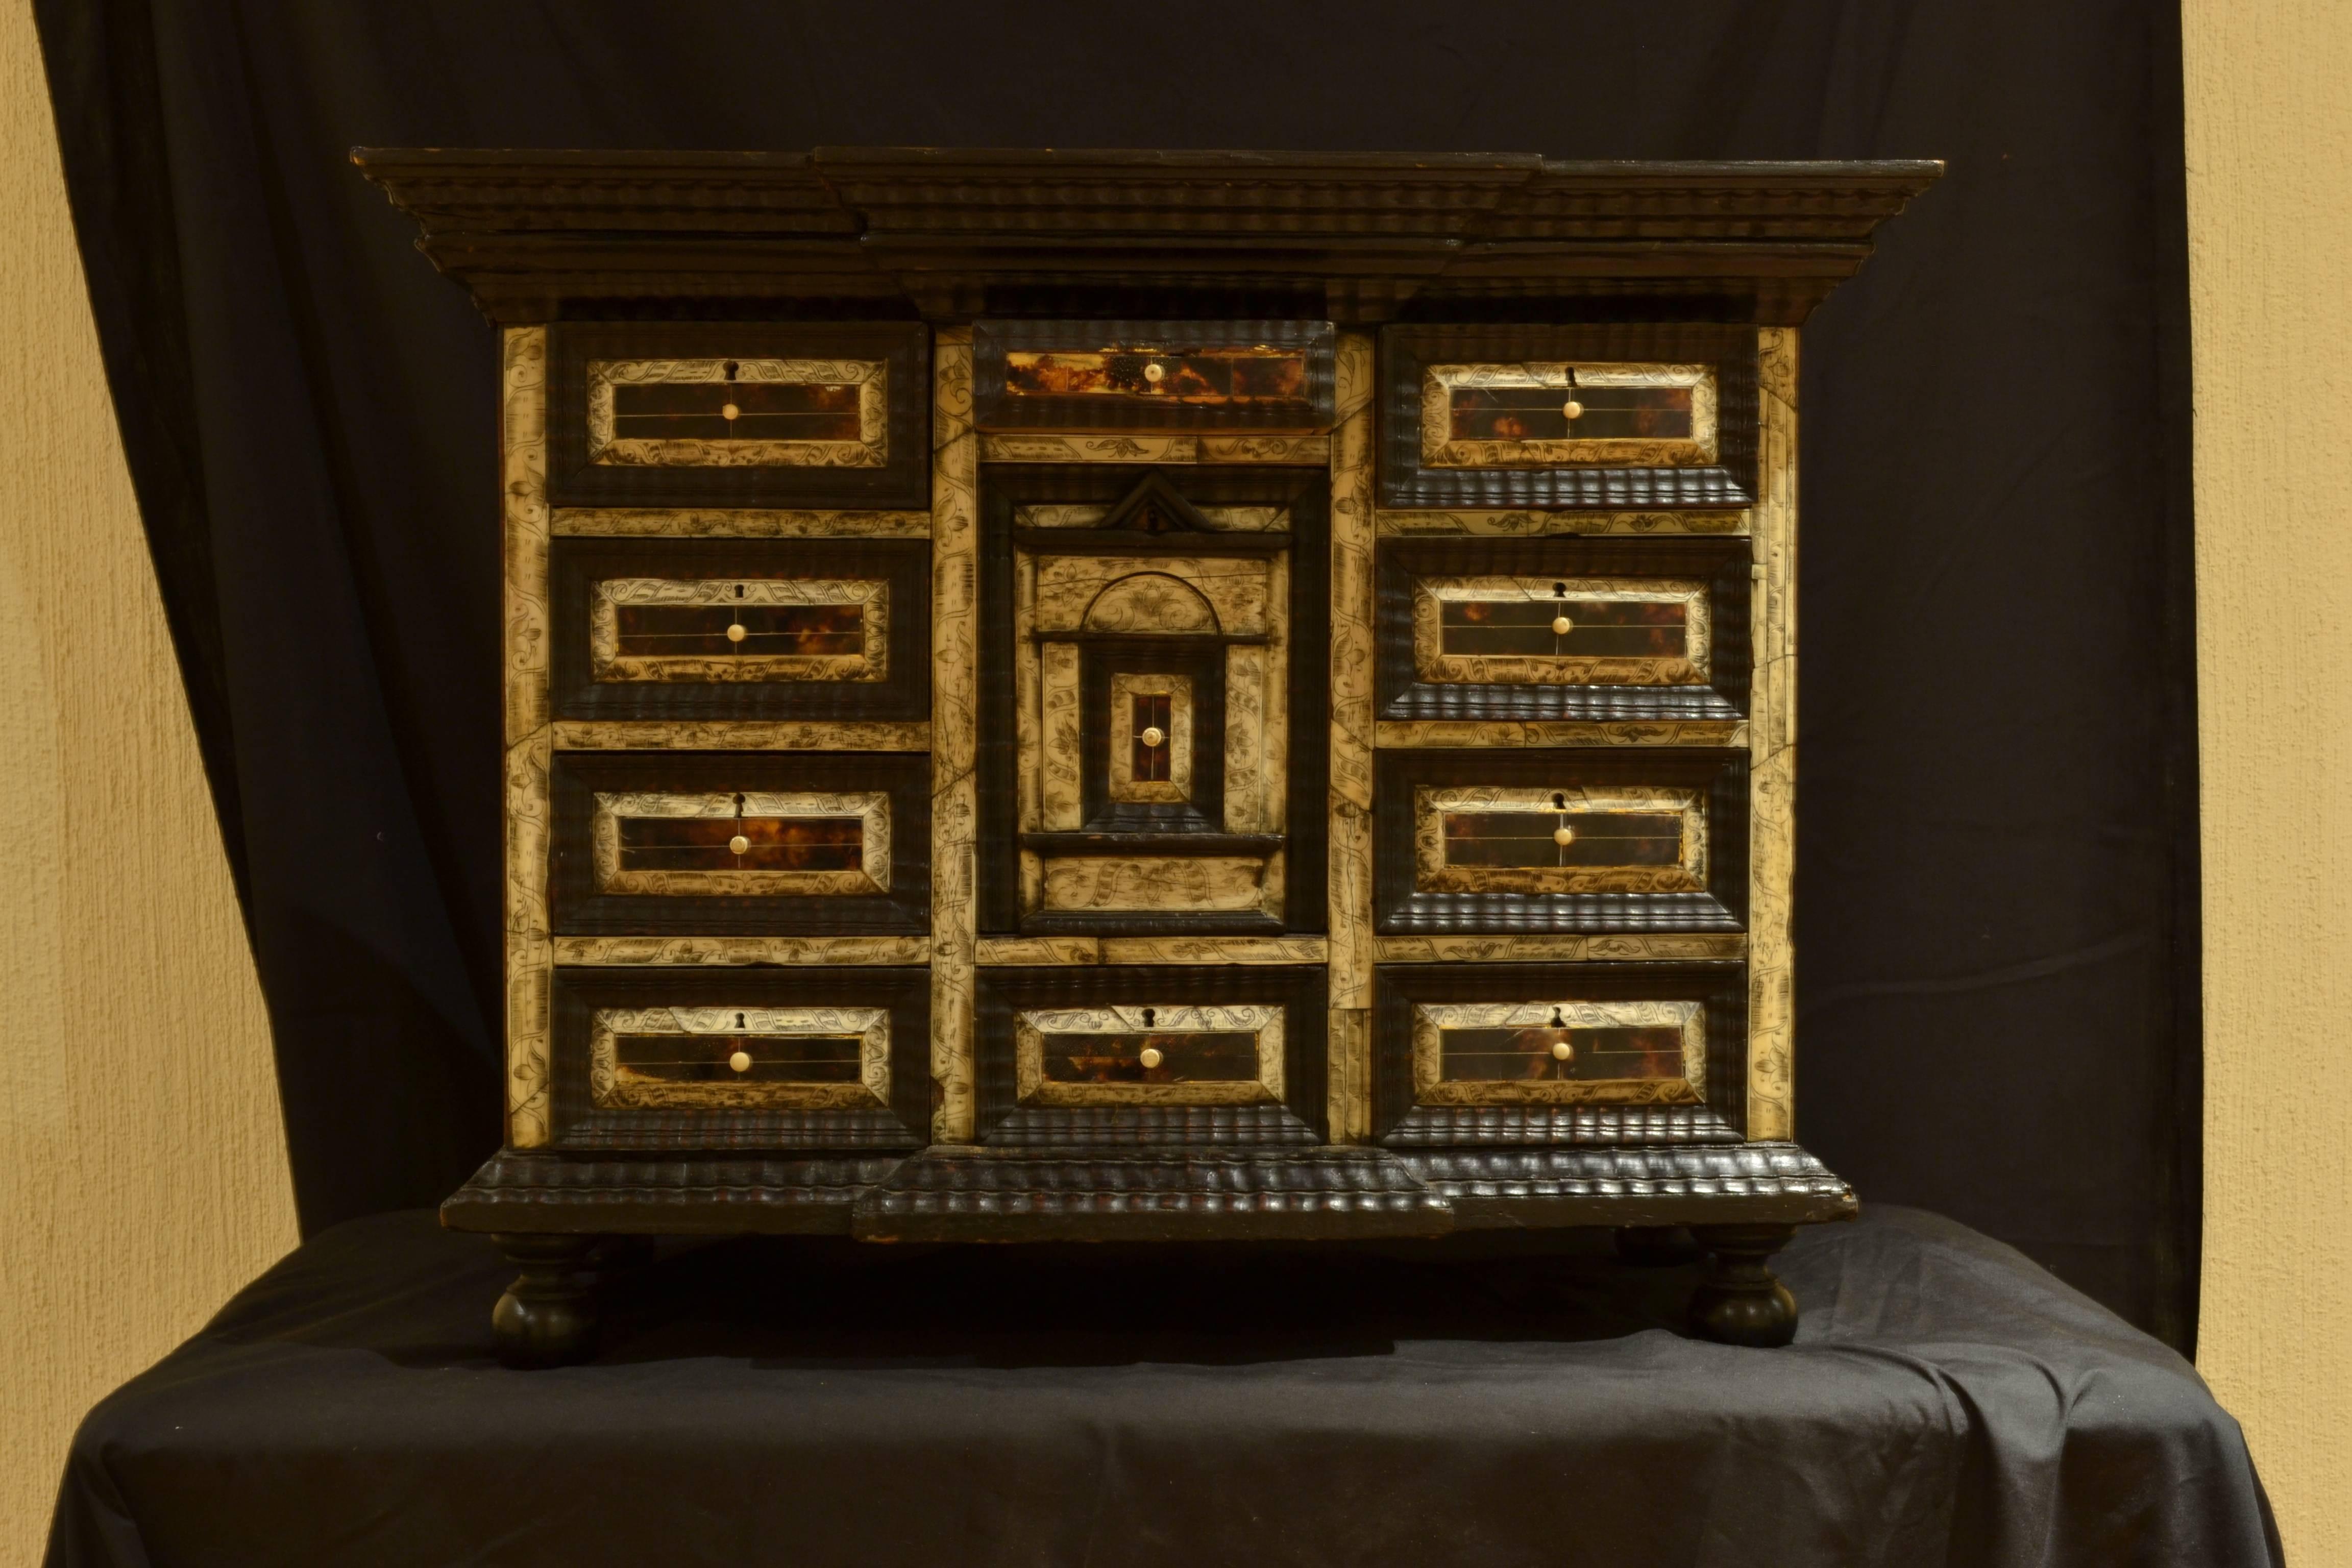 Mexican cabinet. Made of tortoiseshell, pen-engraved and wood. Possible Oaxaca or Puebla, 17th century.